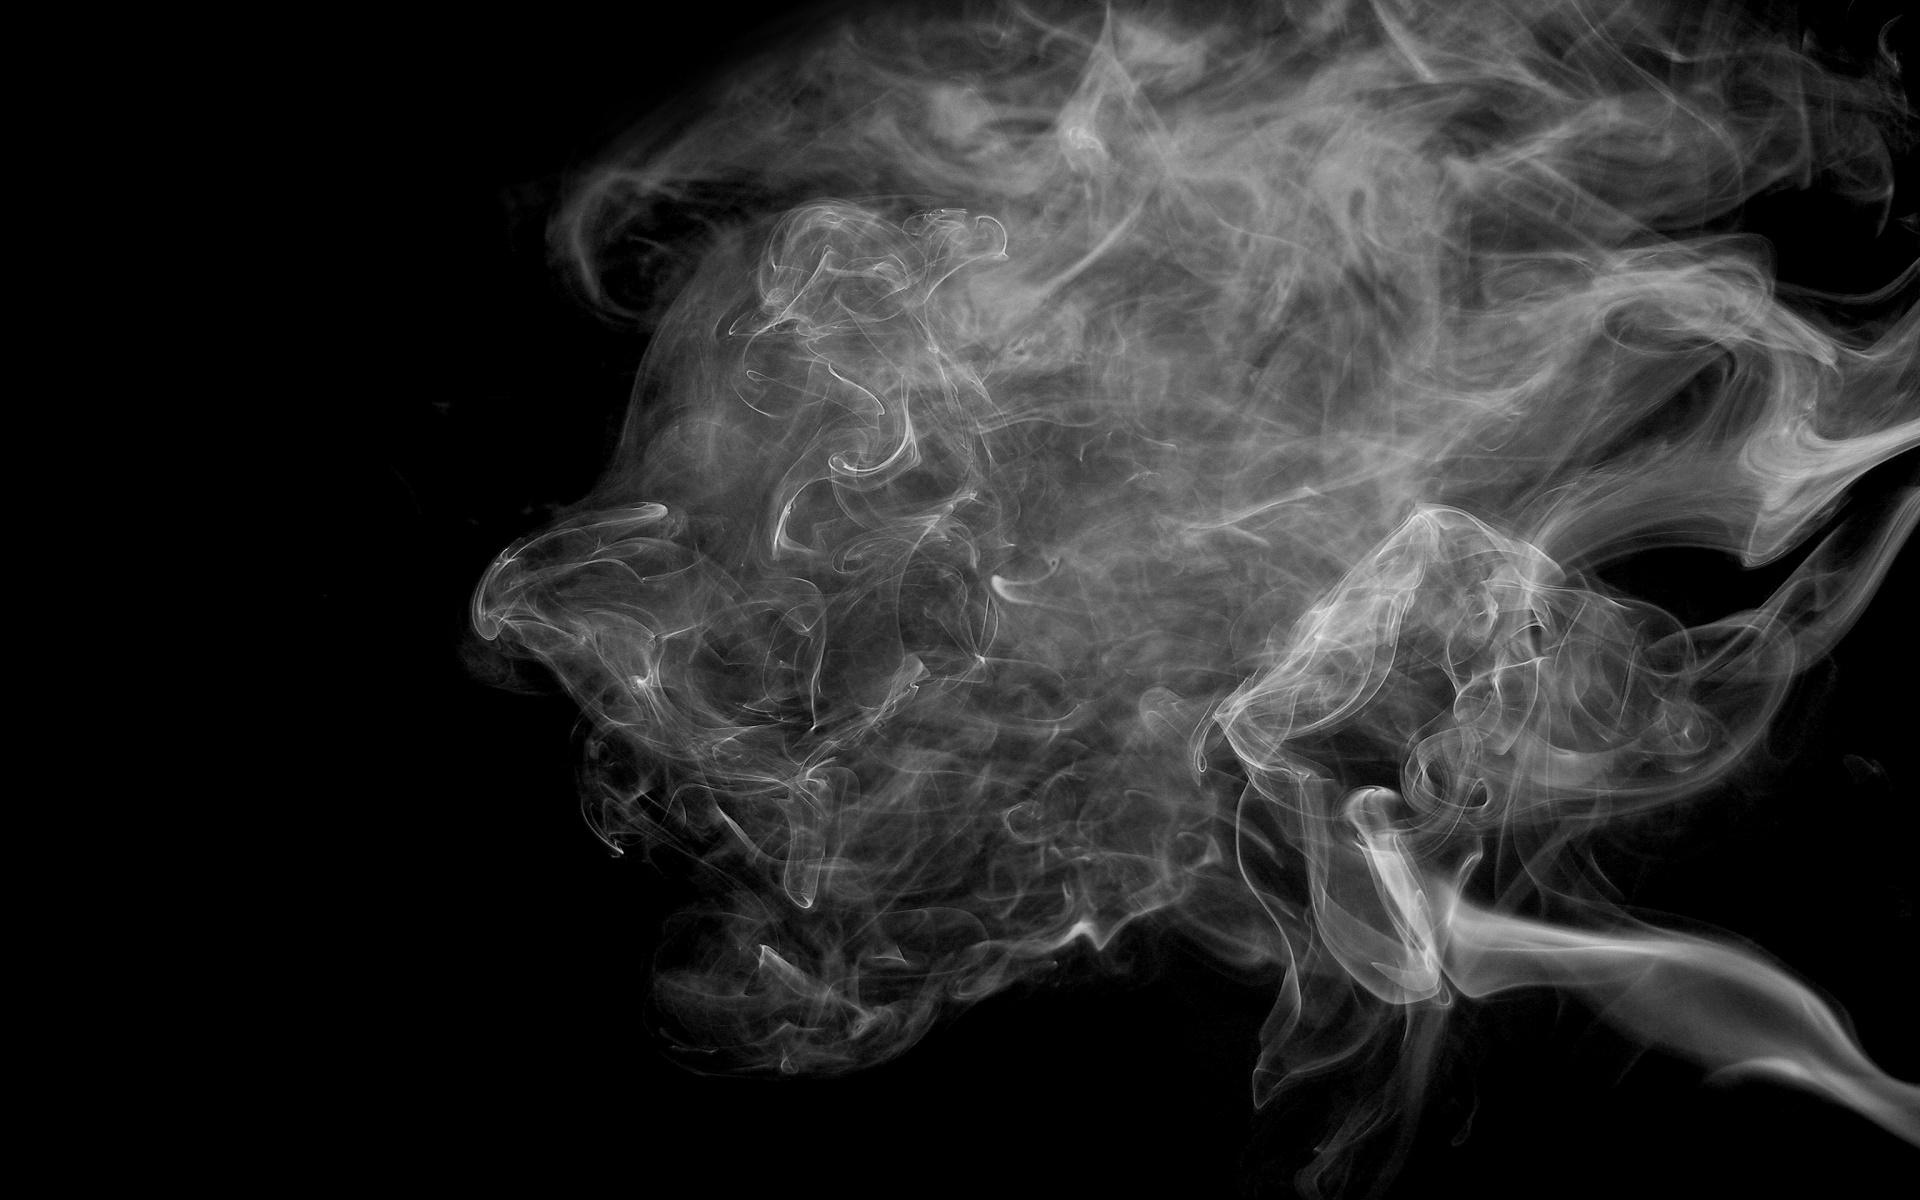 Hot Smoke Png And Psd Background Wallpaper For Photoshop Photoshop | My ...